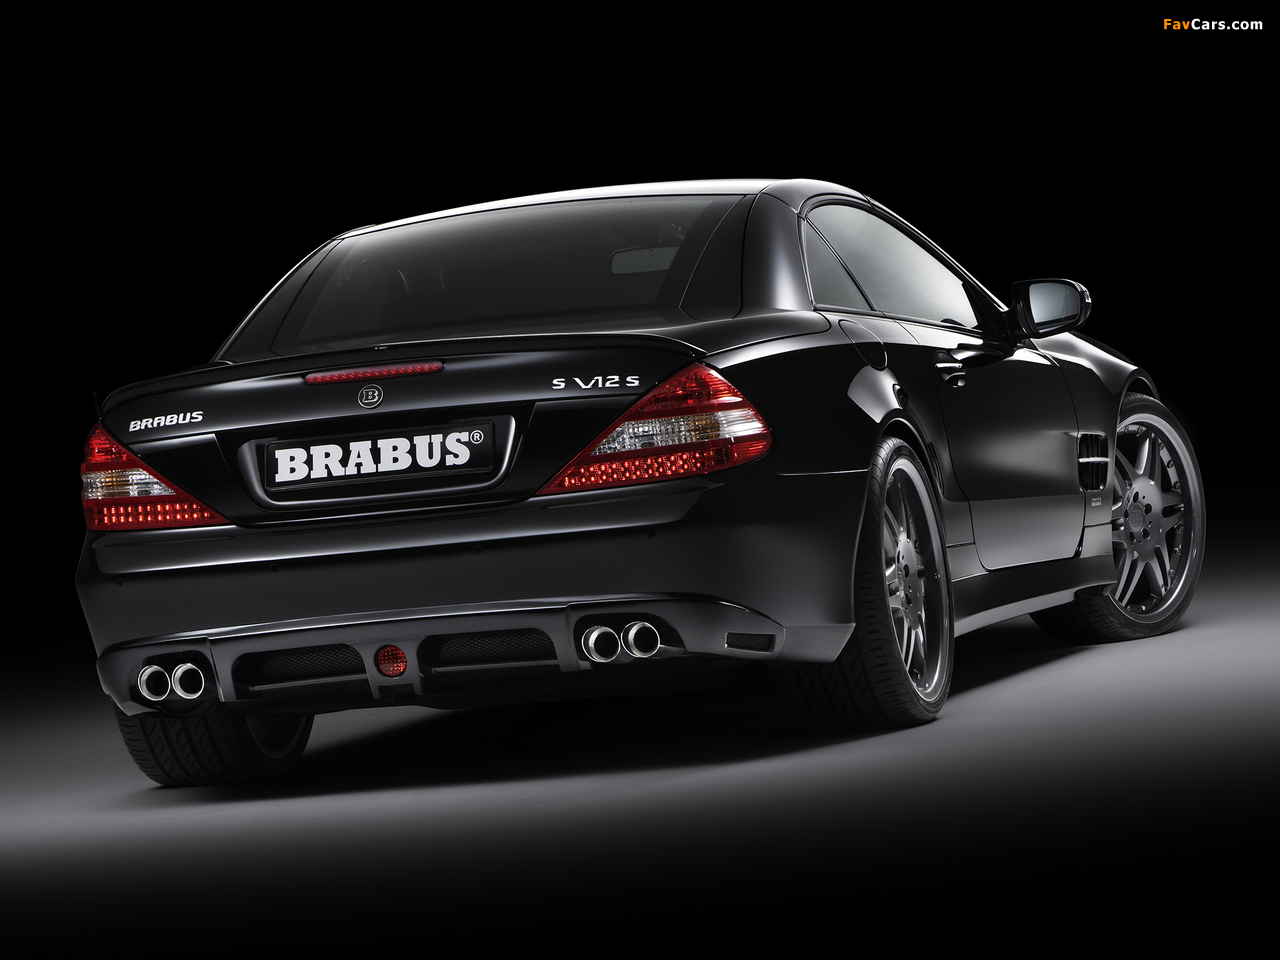 Brabus S V12 S (R230) 2008 pictures (1280 x 960)